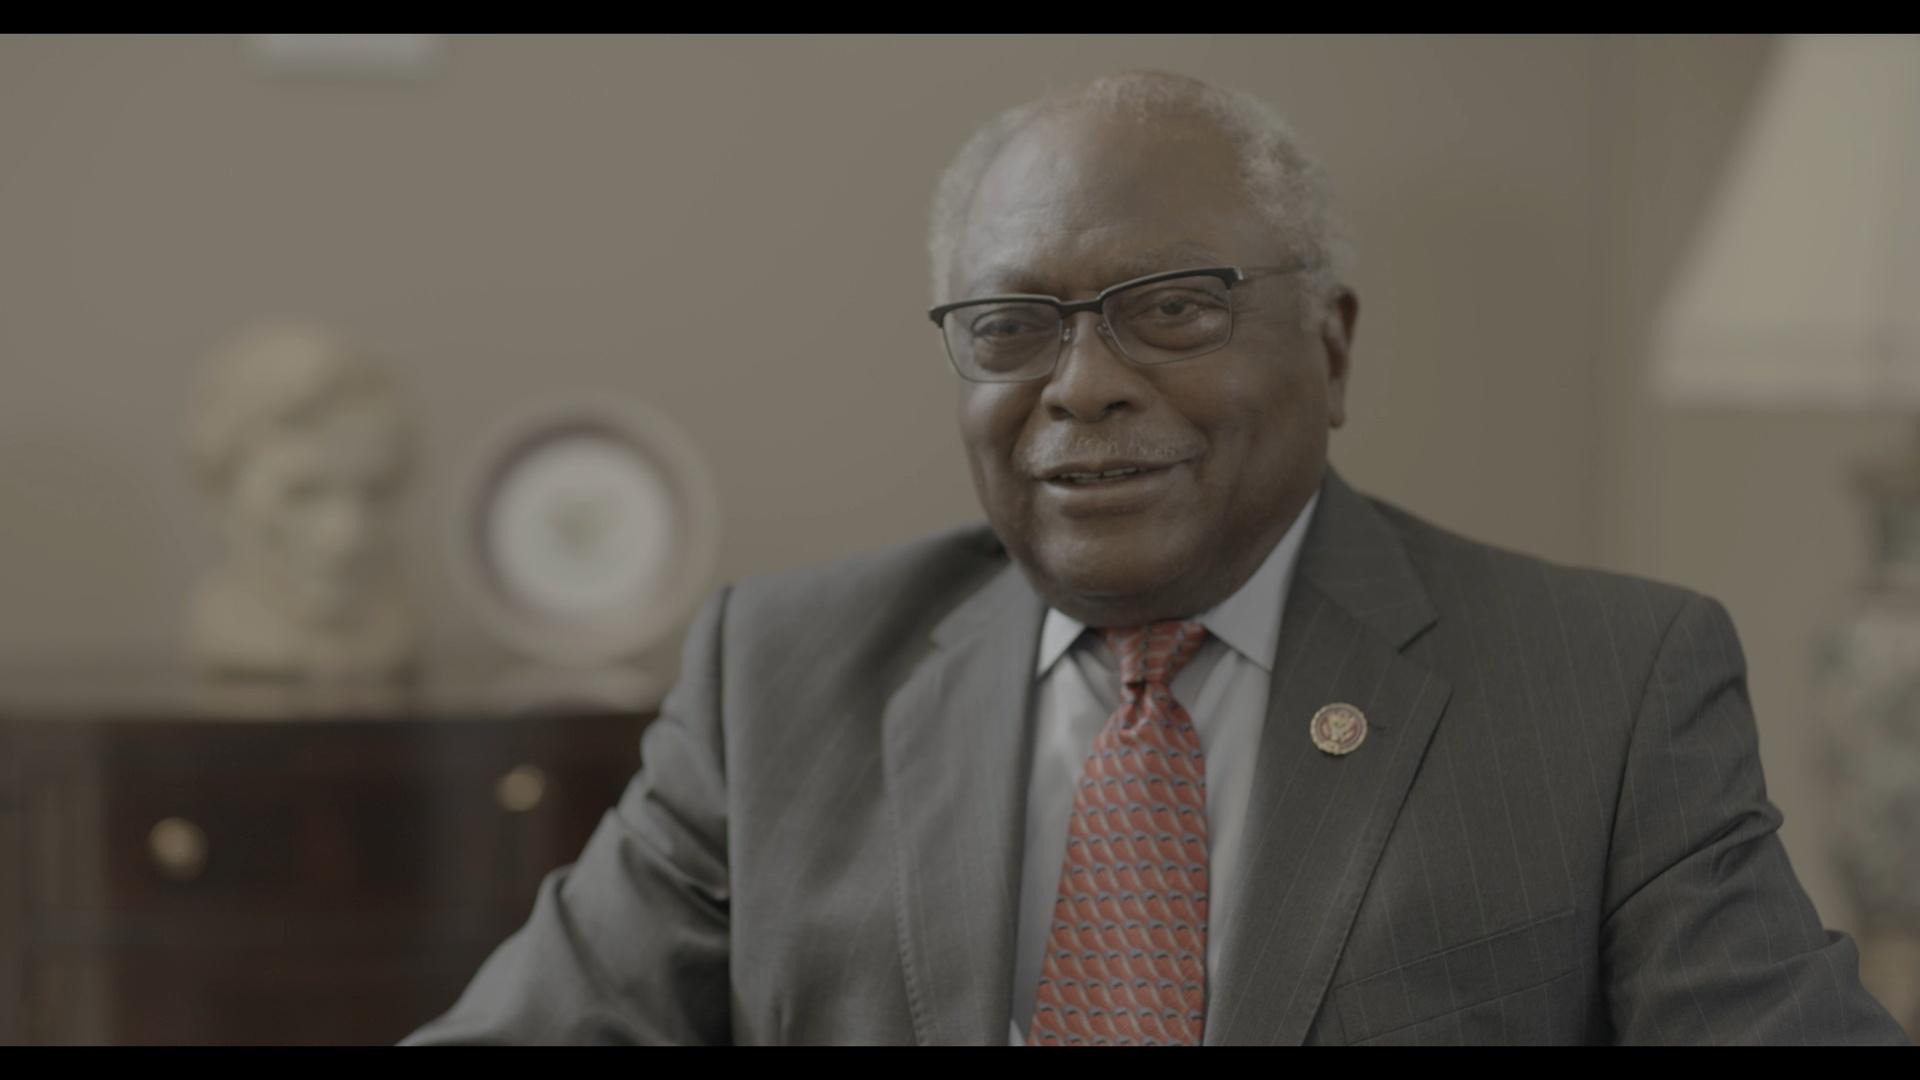 James Clyburn represents South Carolina’s 6th District in the U.S. House of Representatives.